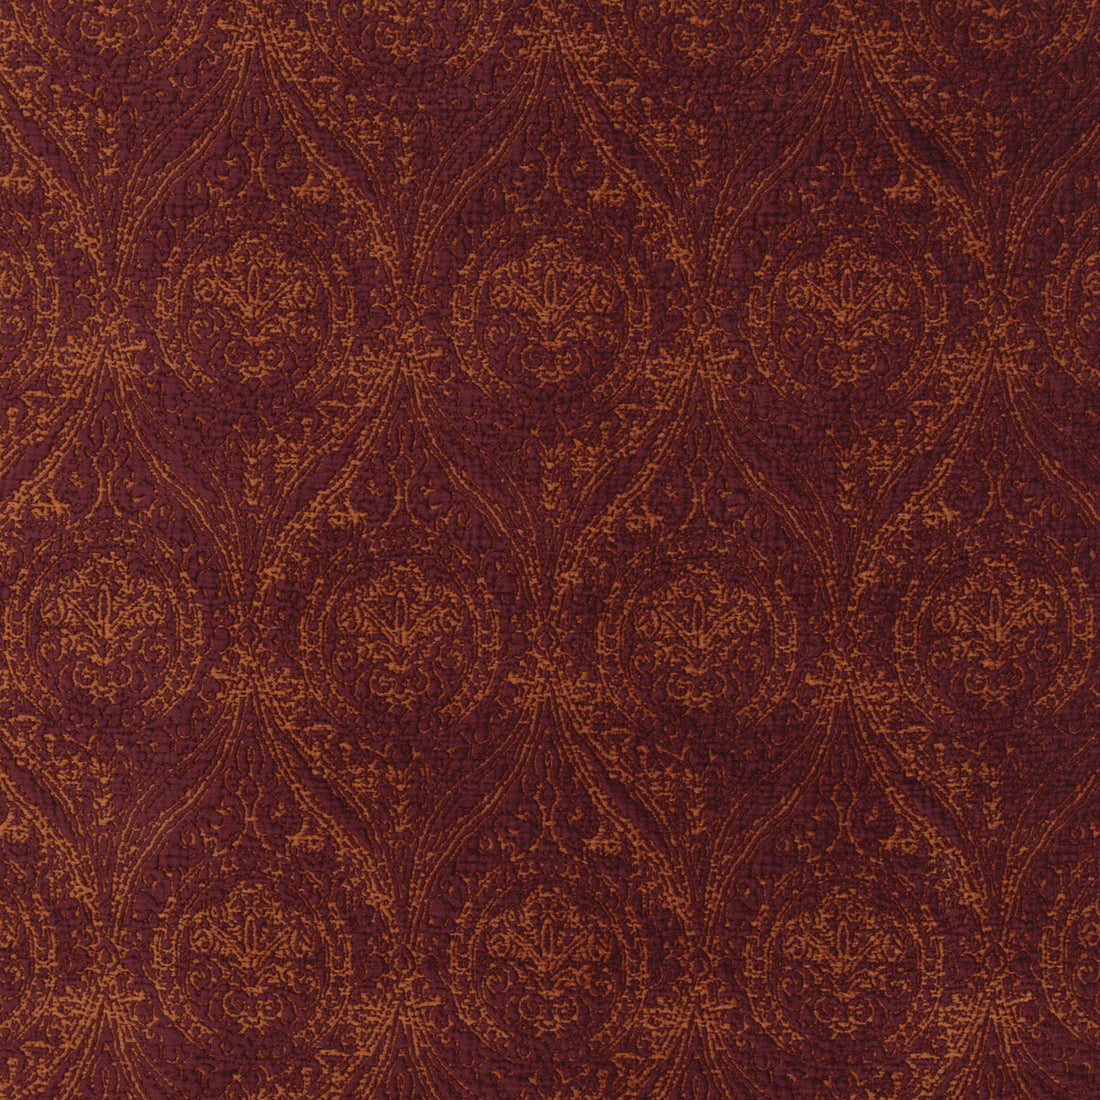 Wolsey fabric in garnet color - pattern BF10654.3.0 - by G P &amp; J Baker in the Historic Royal Palaces collection